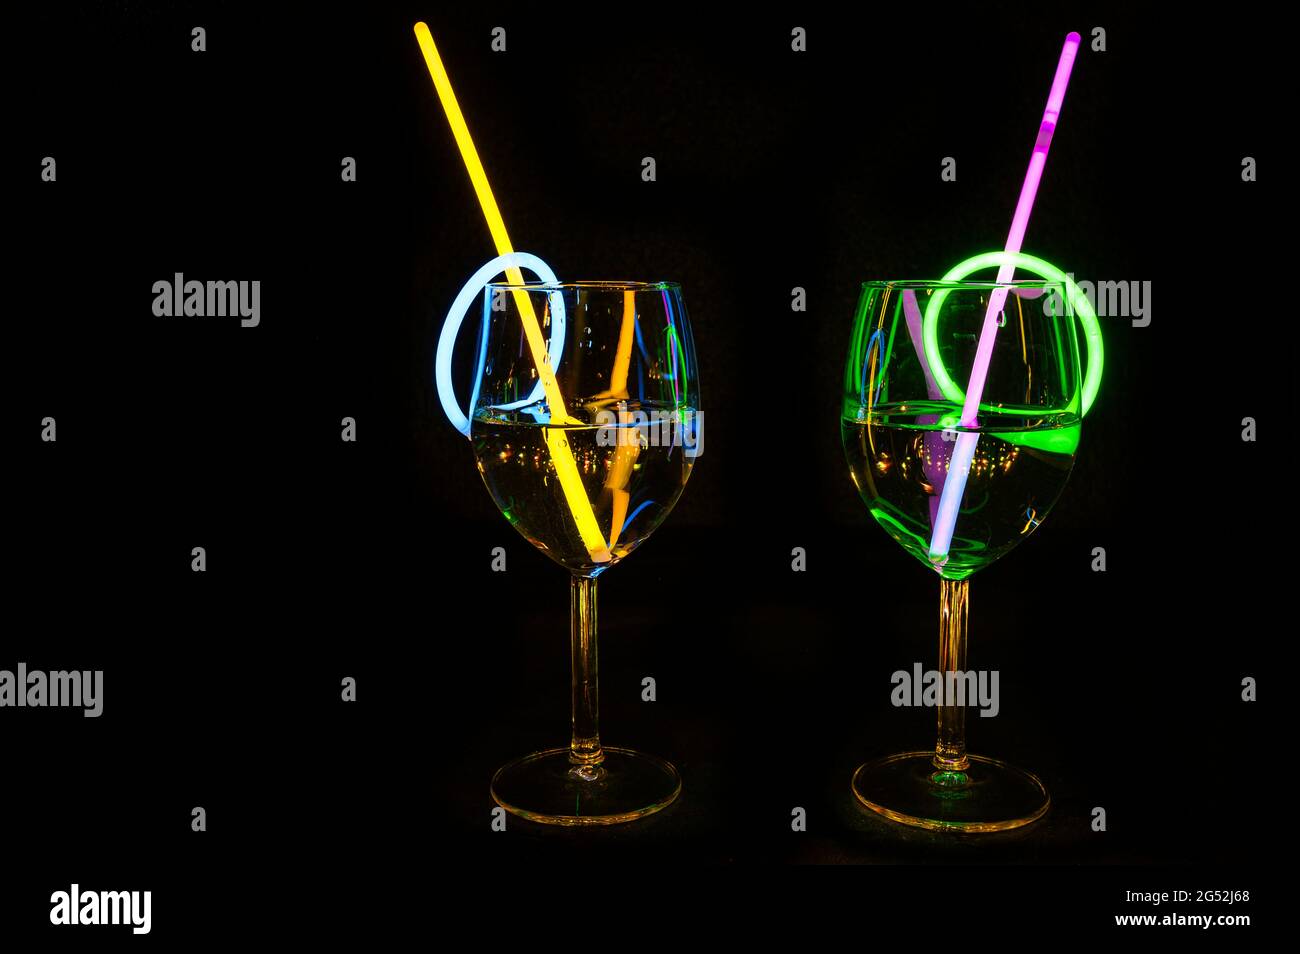 Holiday party delicious drink in a bar wine glass colorful light reflection with dark background for holidays, christmas, new year and gathering leisu Stock Photo